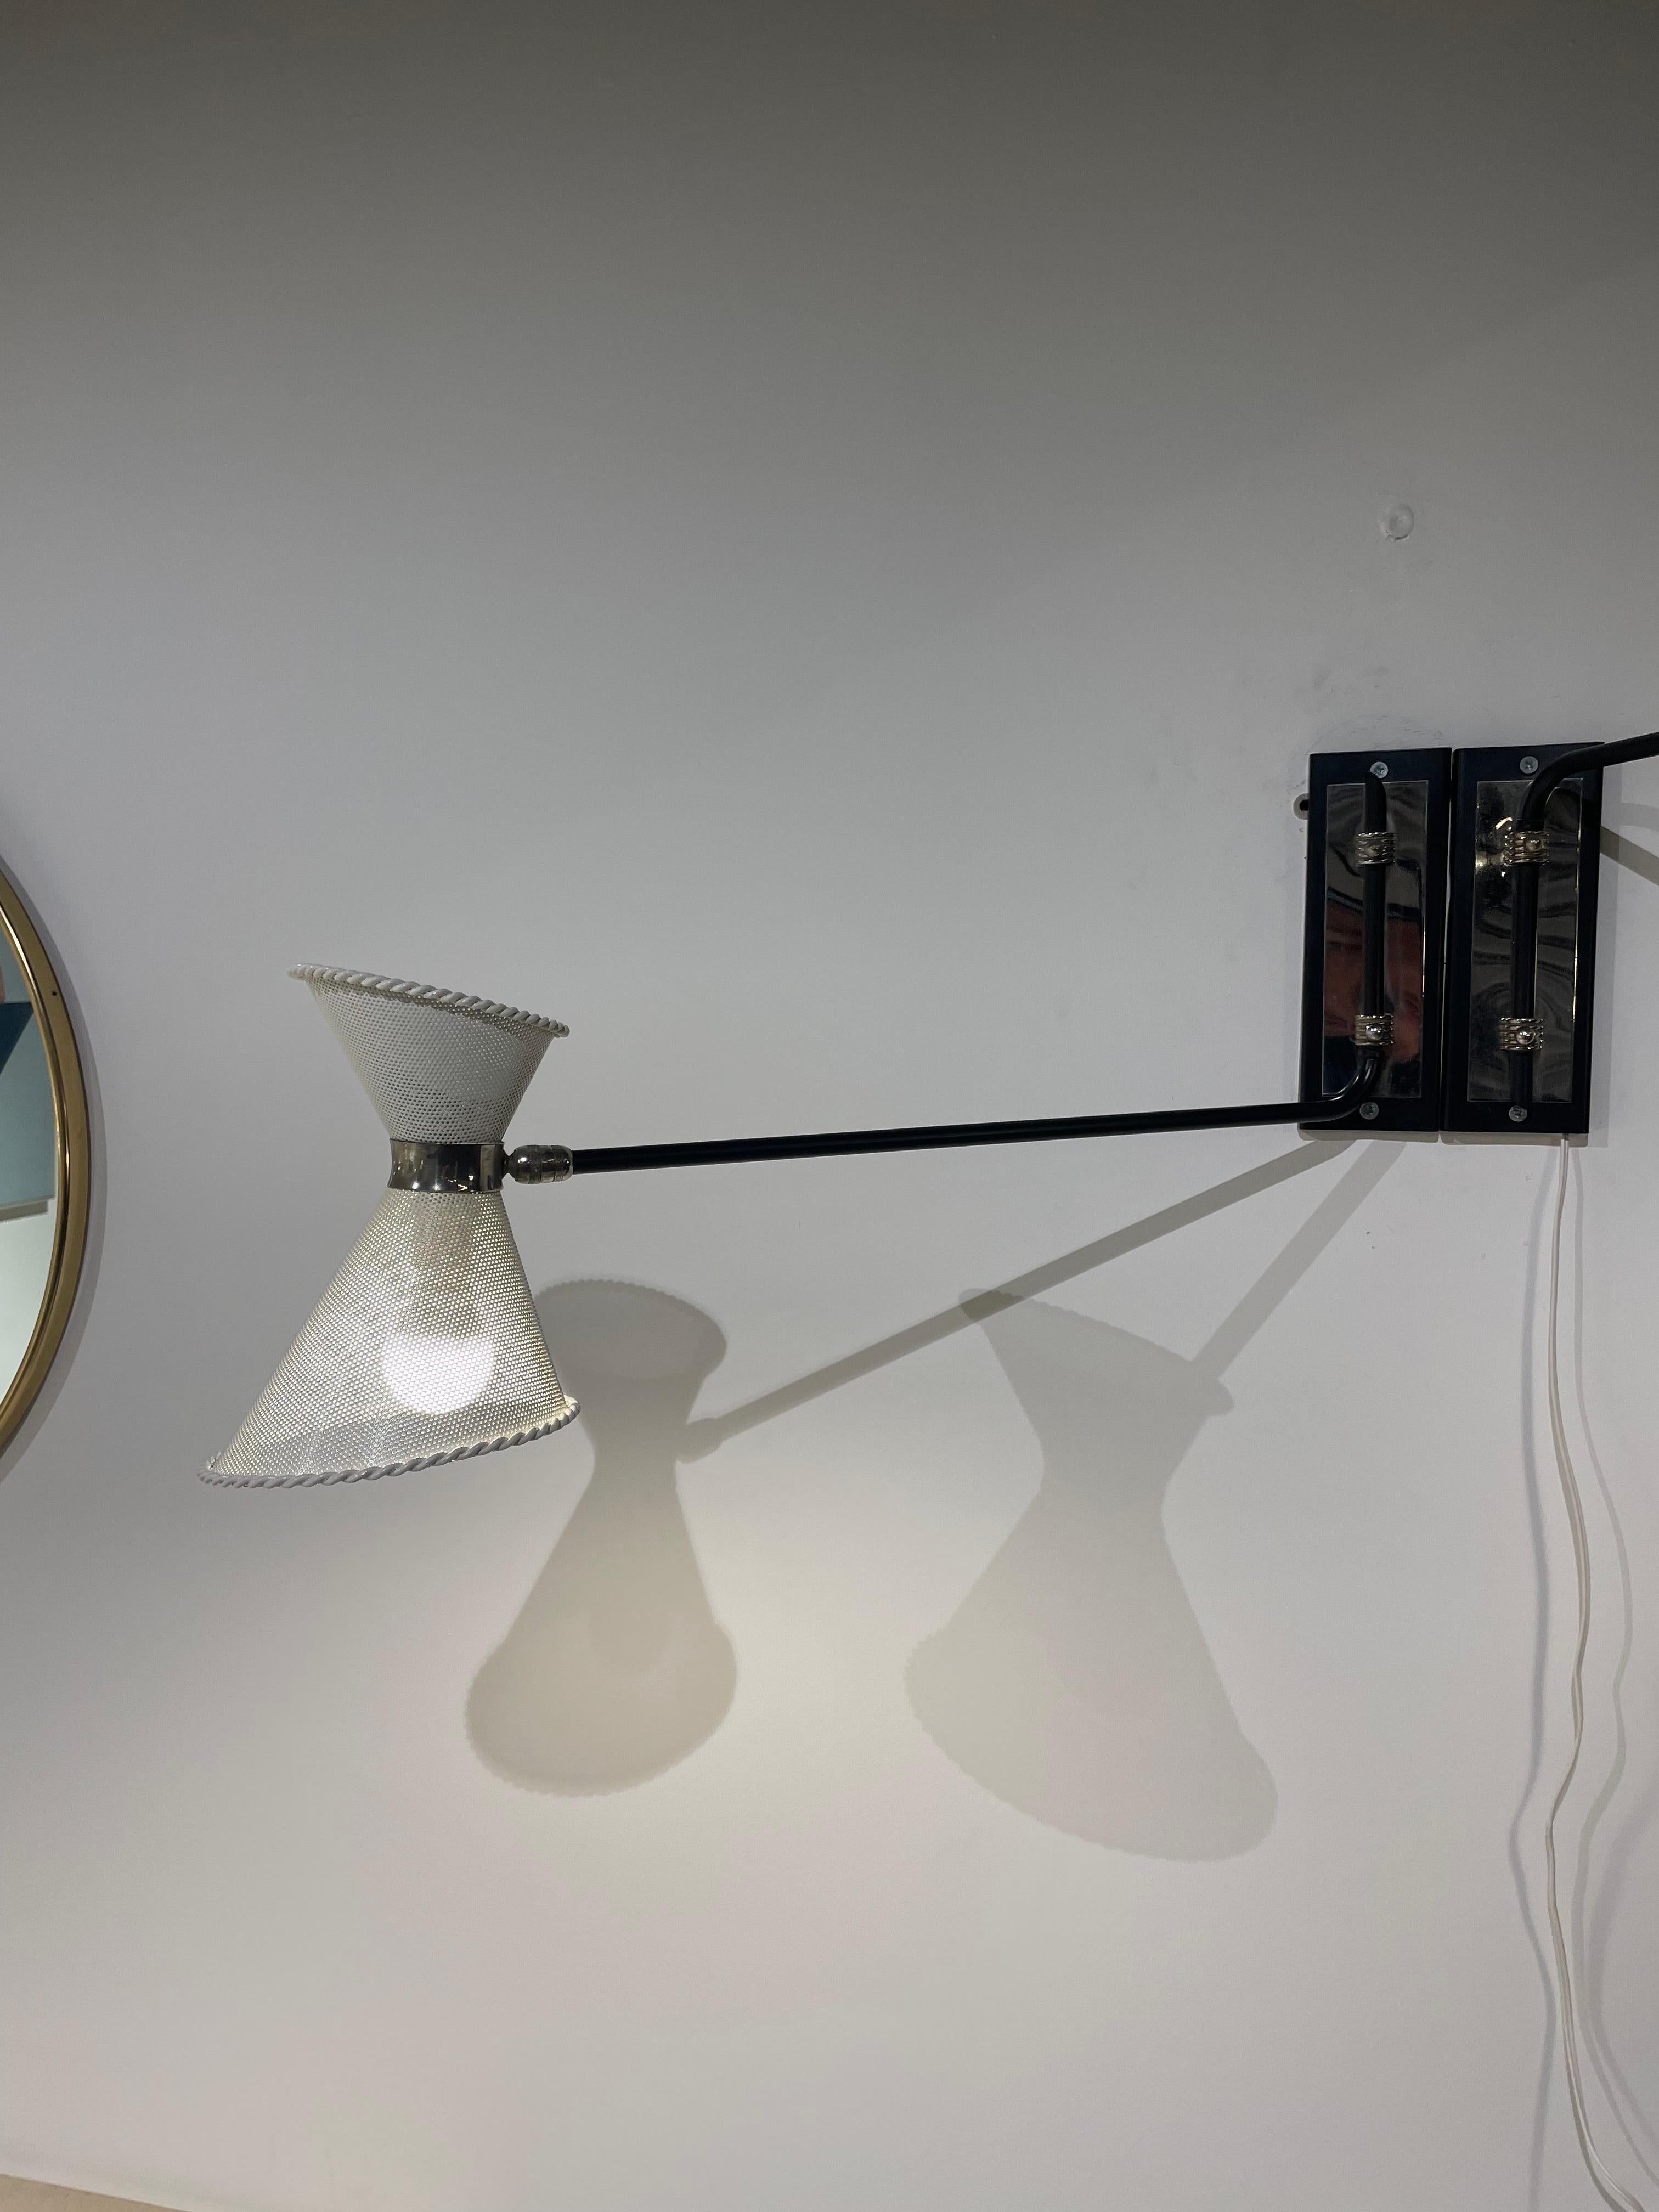 20th Century Pair of Double Adjustable Wall Lights by Arlus 1950